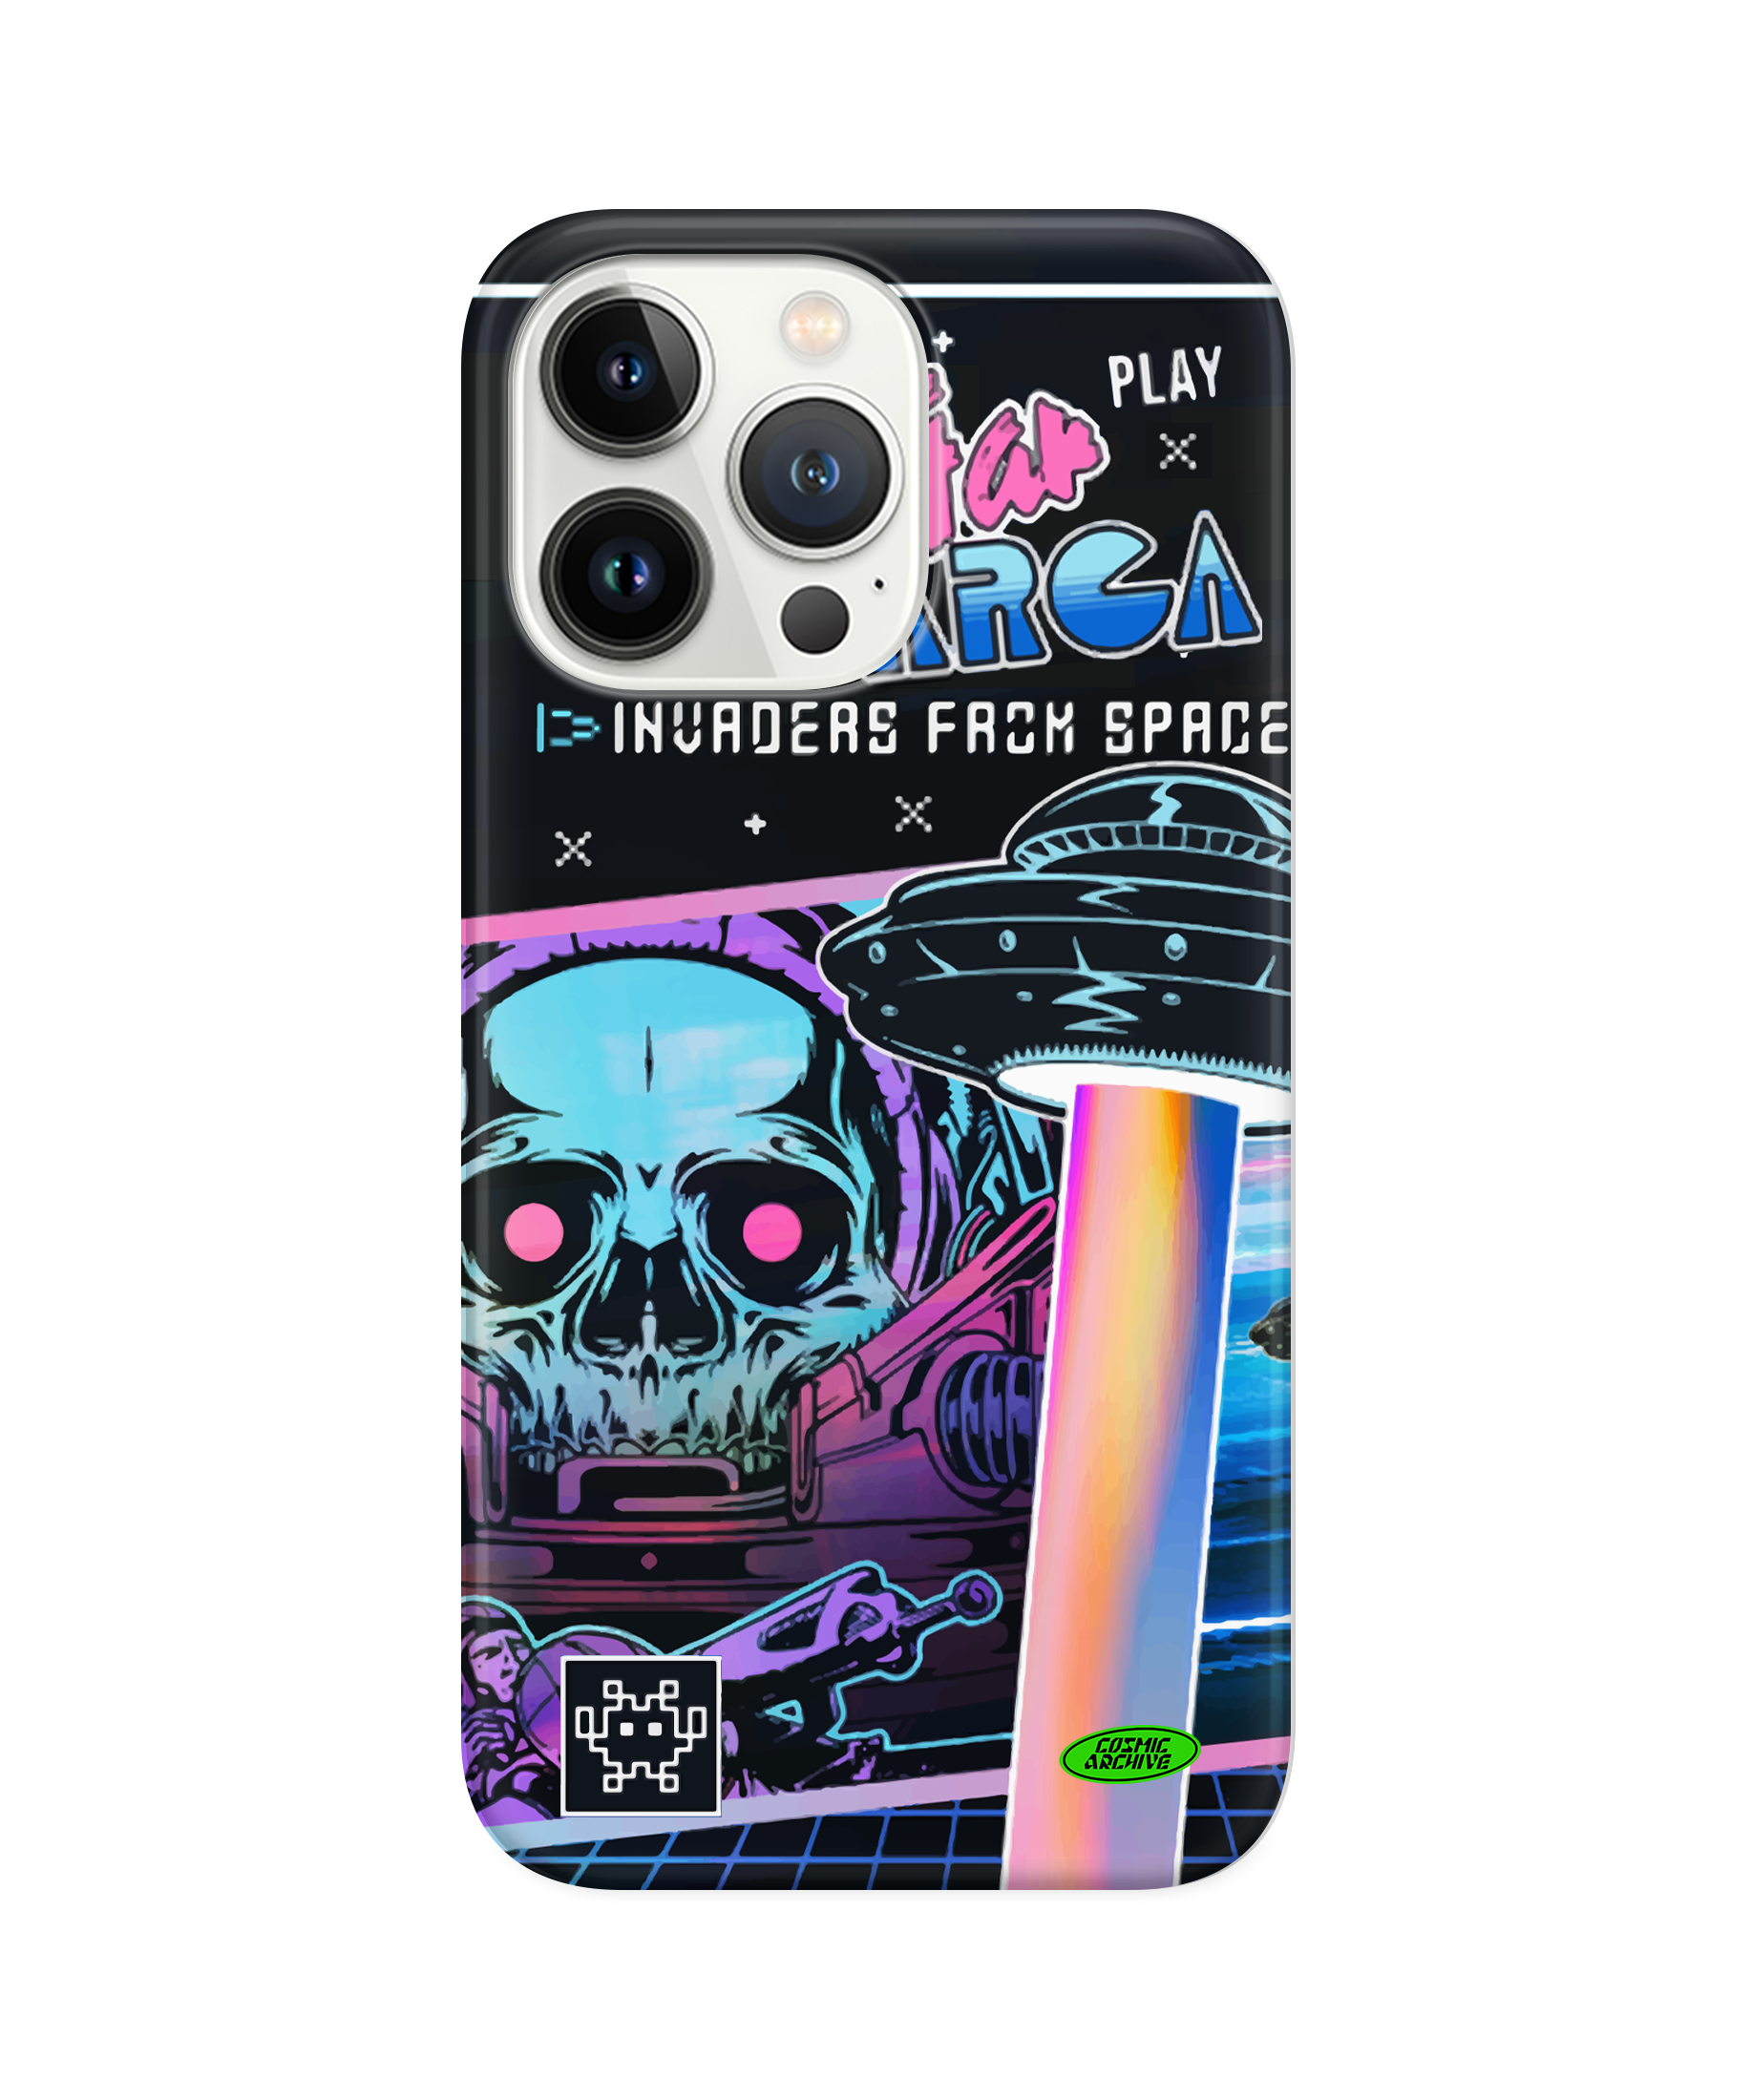 [PHONE CASE] invaders from space 하드 케이스